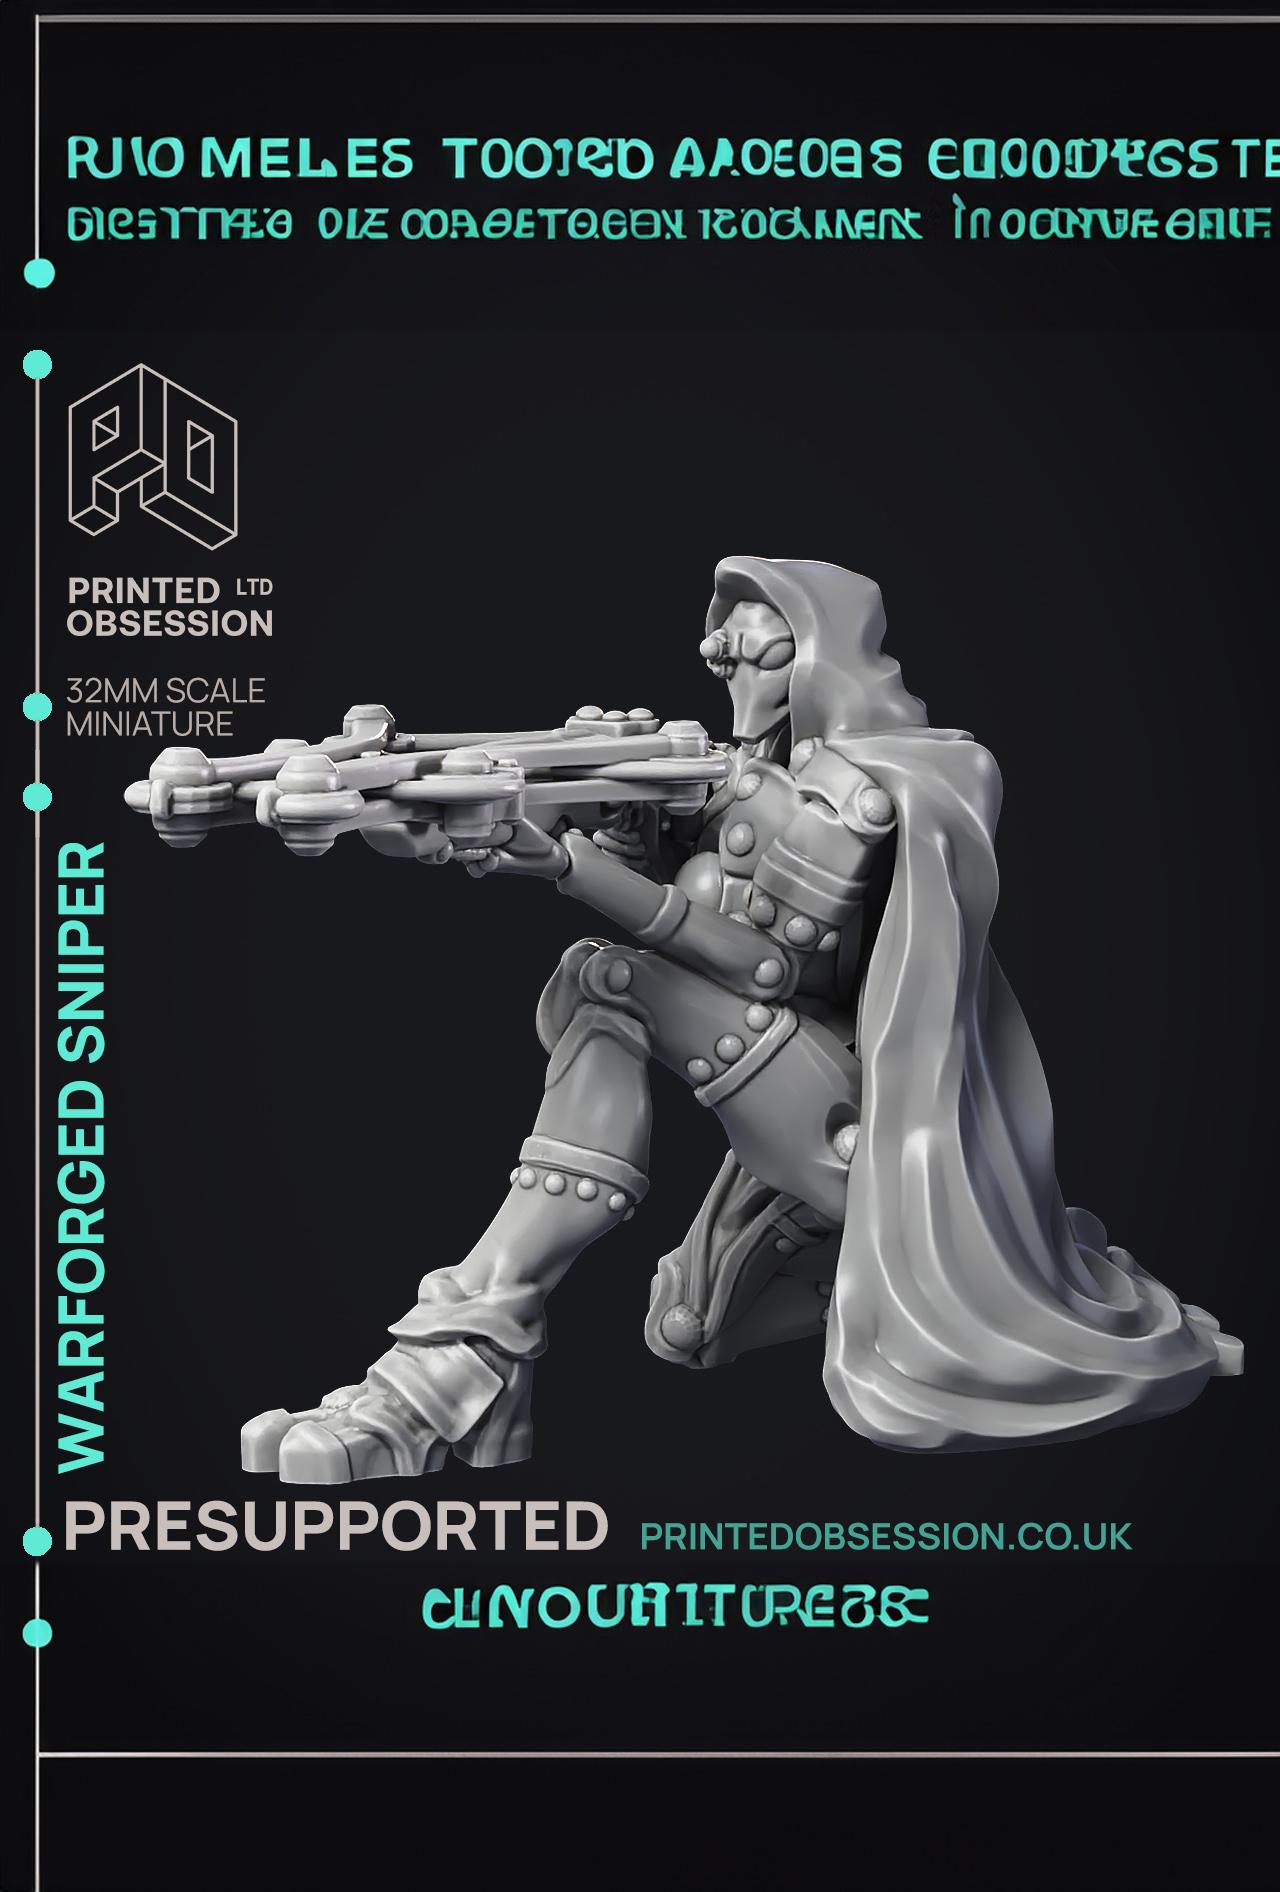 Sniper Warforged - Assassin Clan - PRESUPPORTED - 32 mm scale  3d model